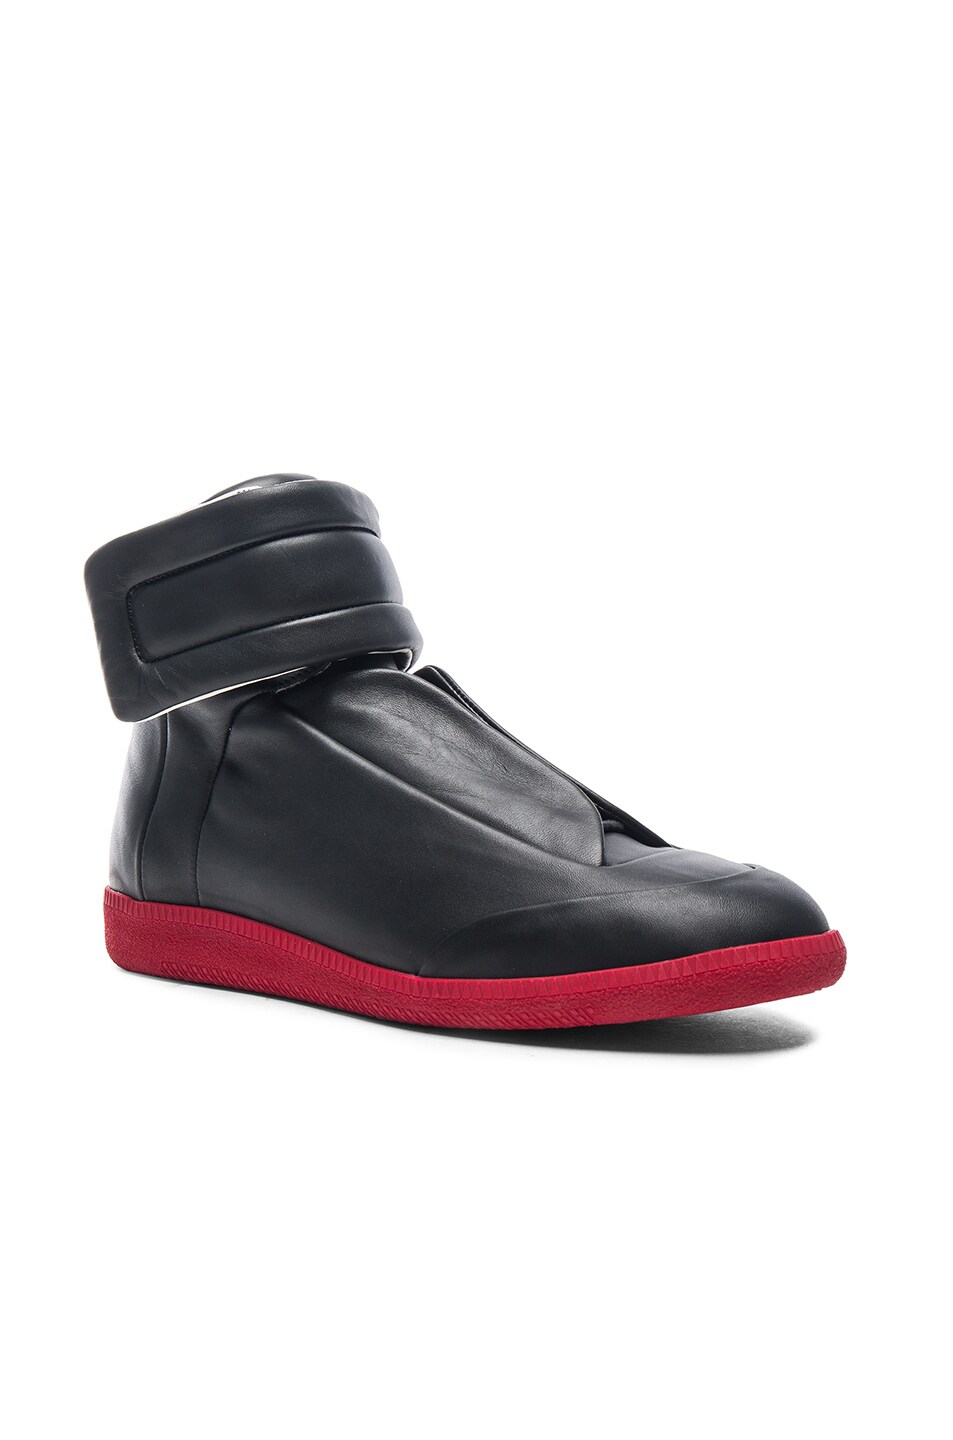 Image 1 of Maison Margiela Calfskin Future High Tops in Black & Red